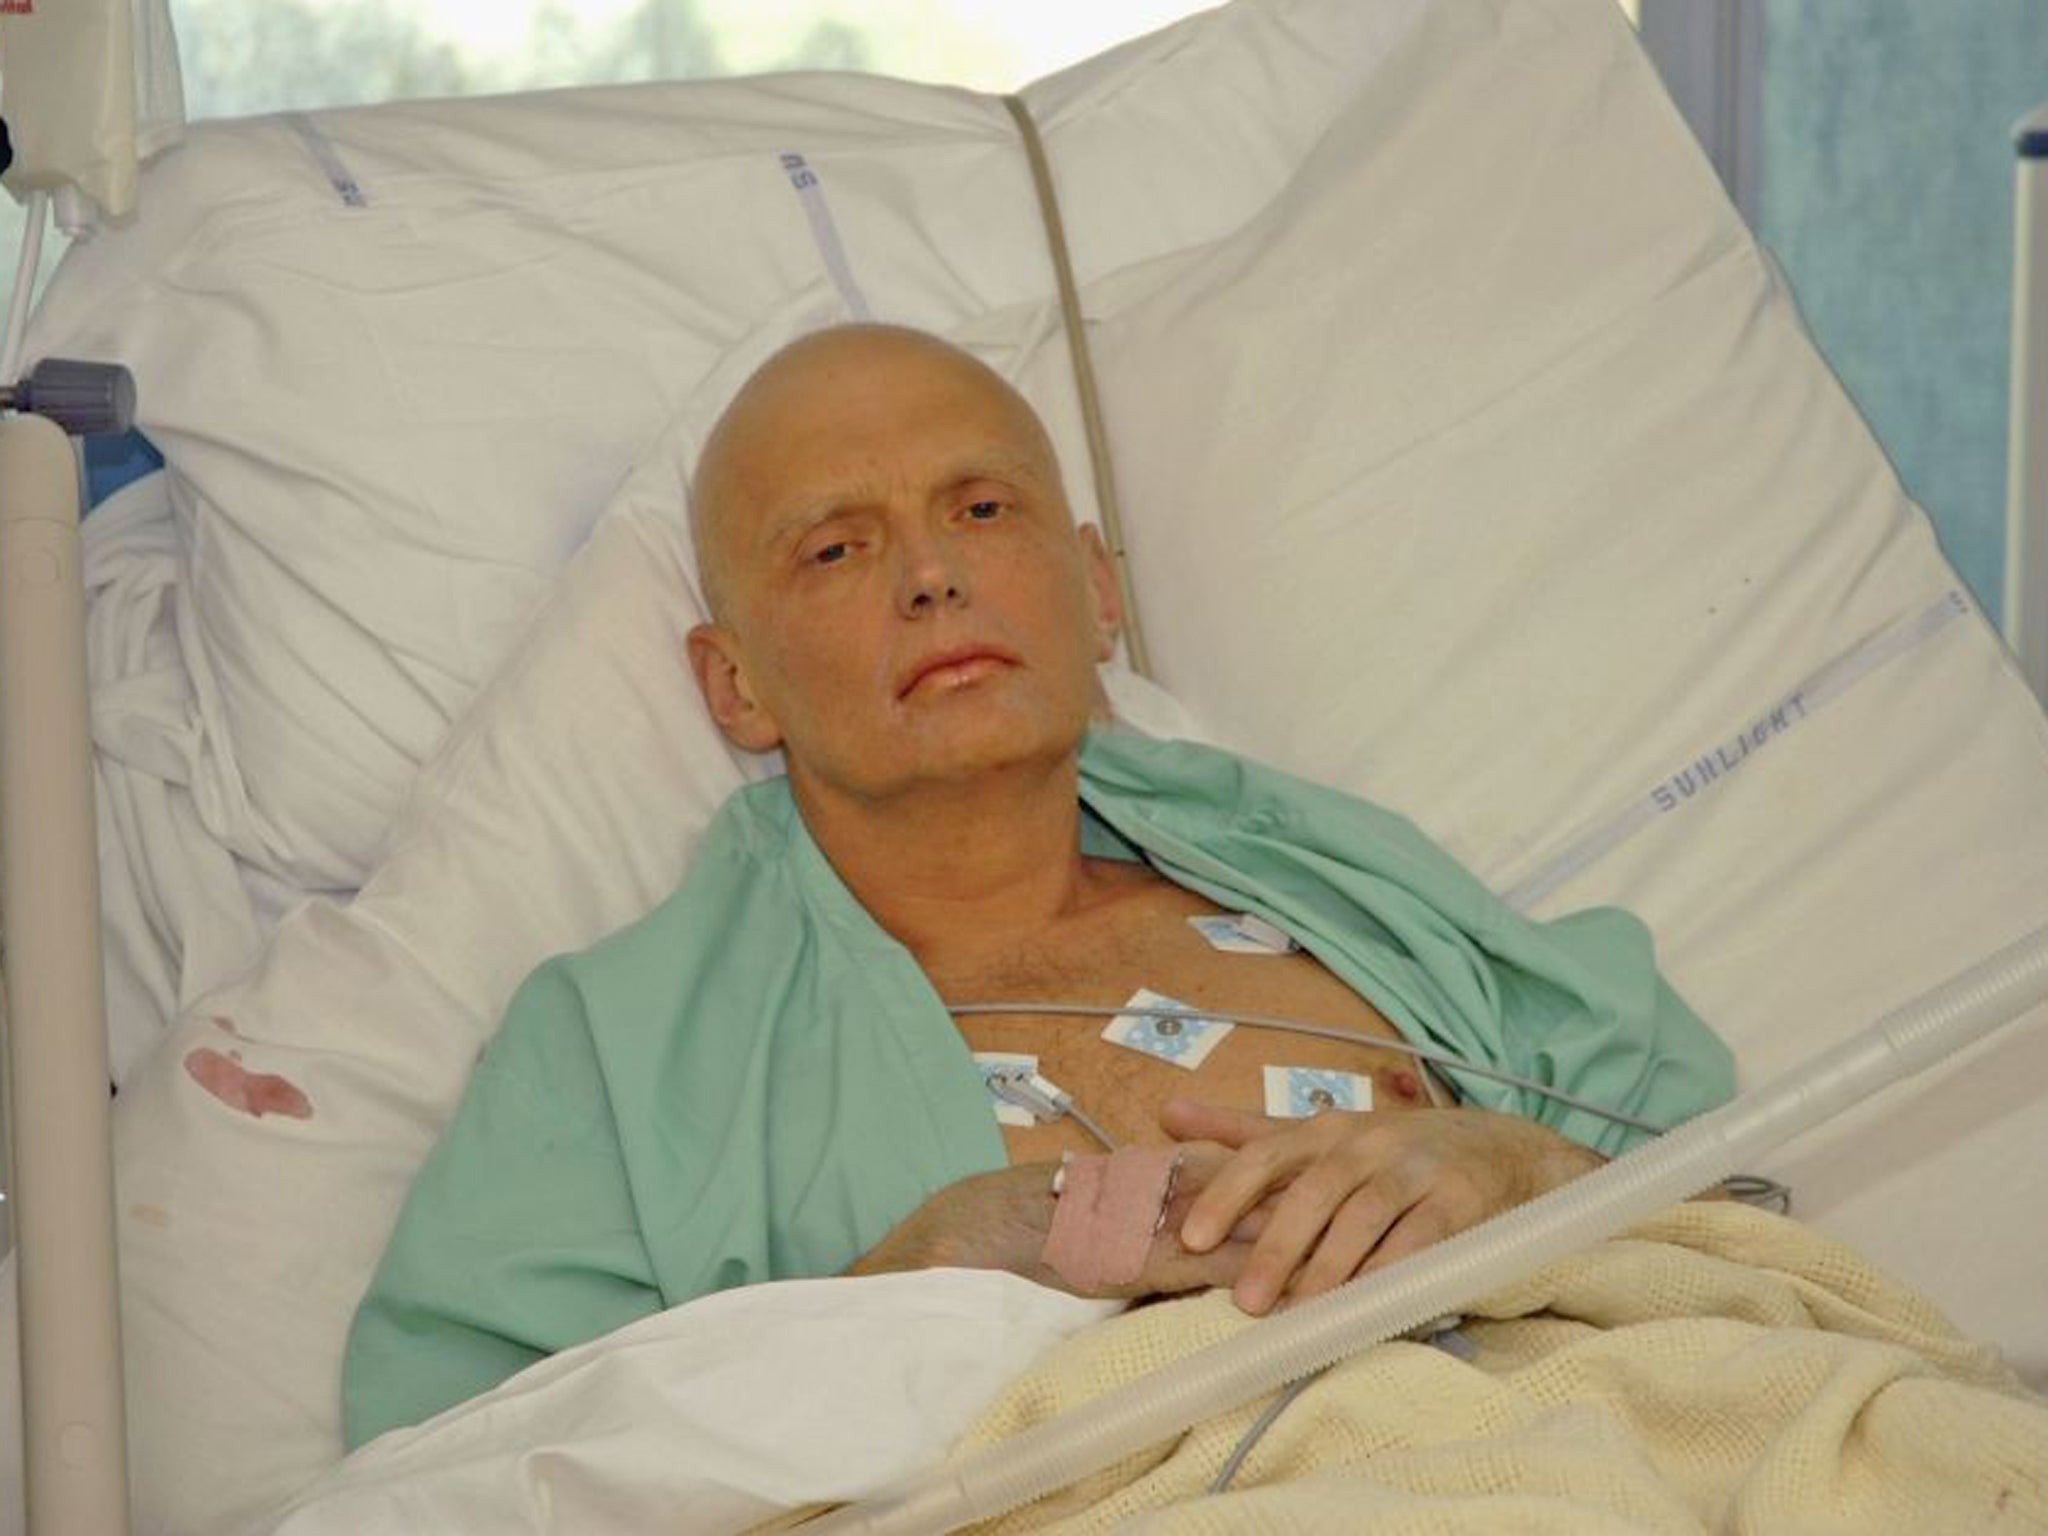 The British government was accused of colluding with the Russians to cover up vital evidence into the murder of Alexander Litvinenko at a pre-inquest hearing into the former KGB agent's death